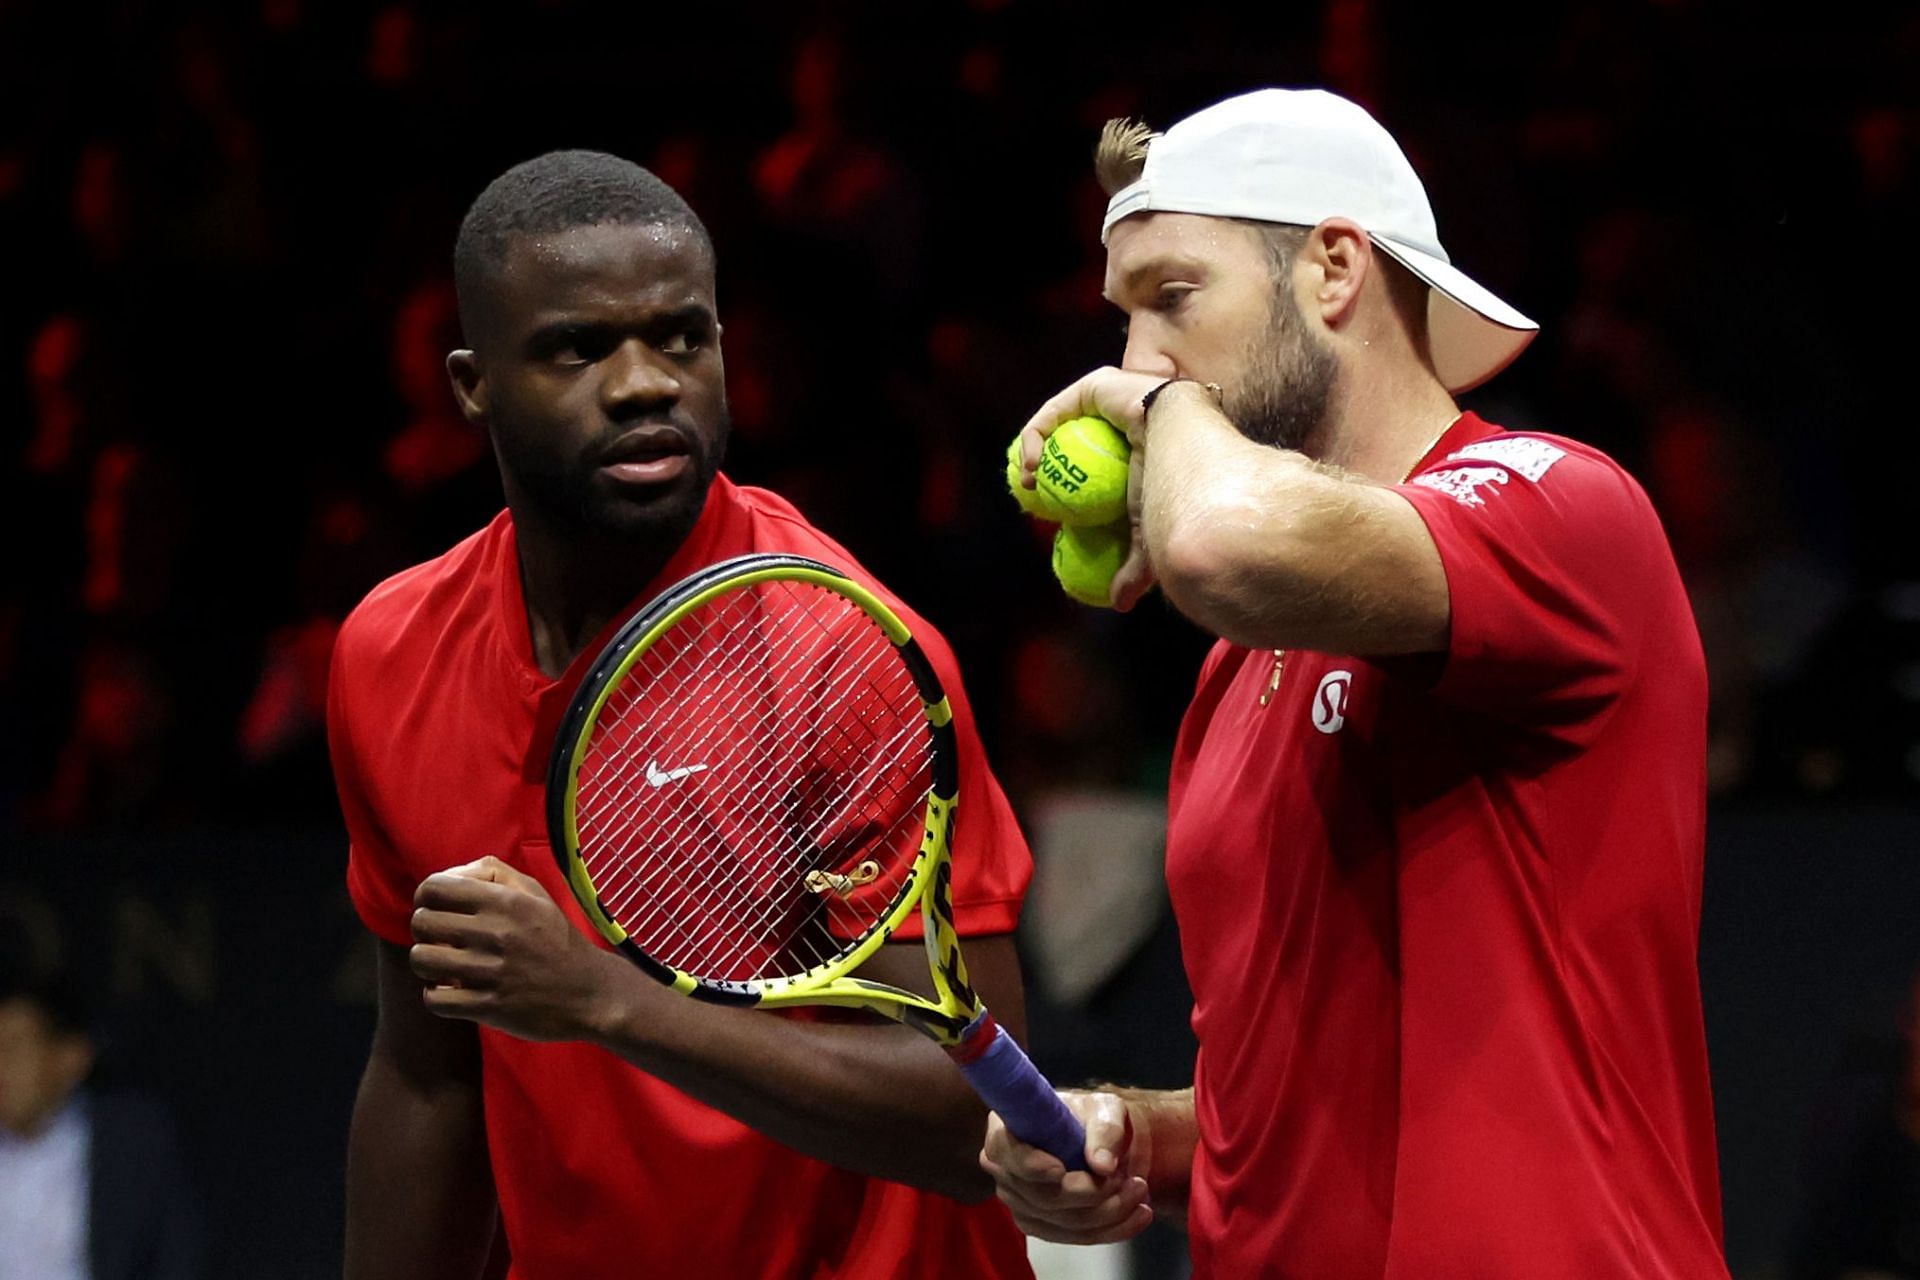 Frances Tiafoe and Jack Sock prevailed over the fan-favorite Roger Federer and Rafael Nadal tandem in the Laver Cup.